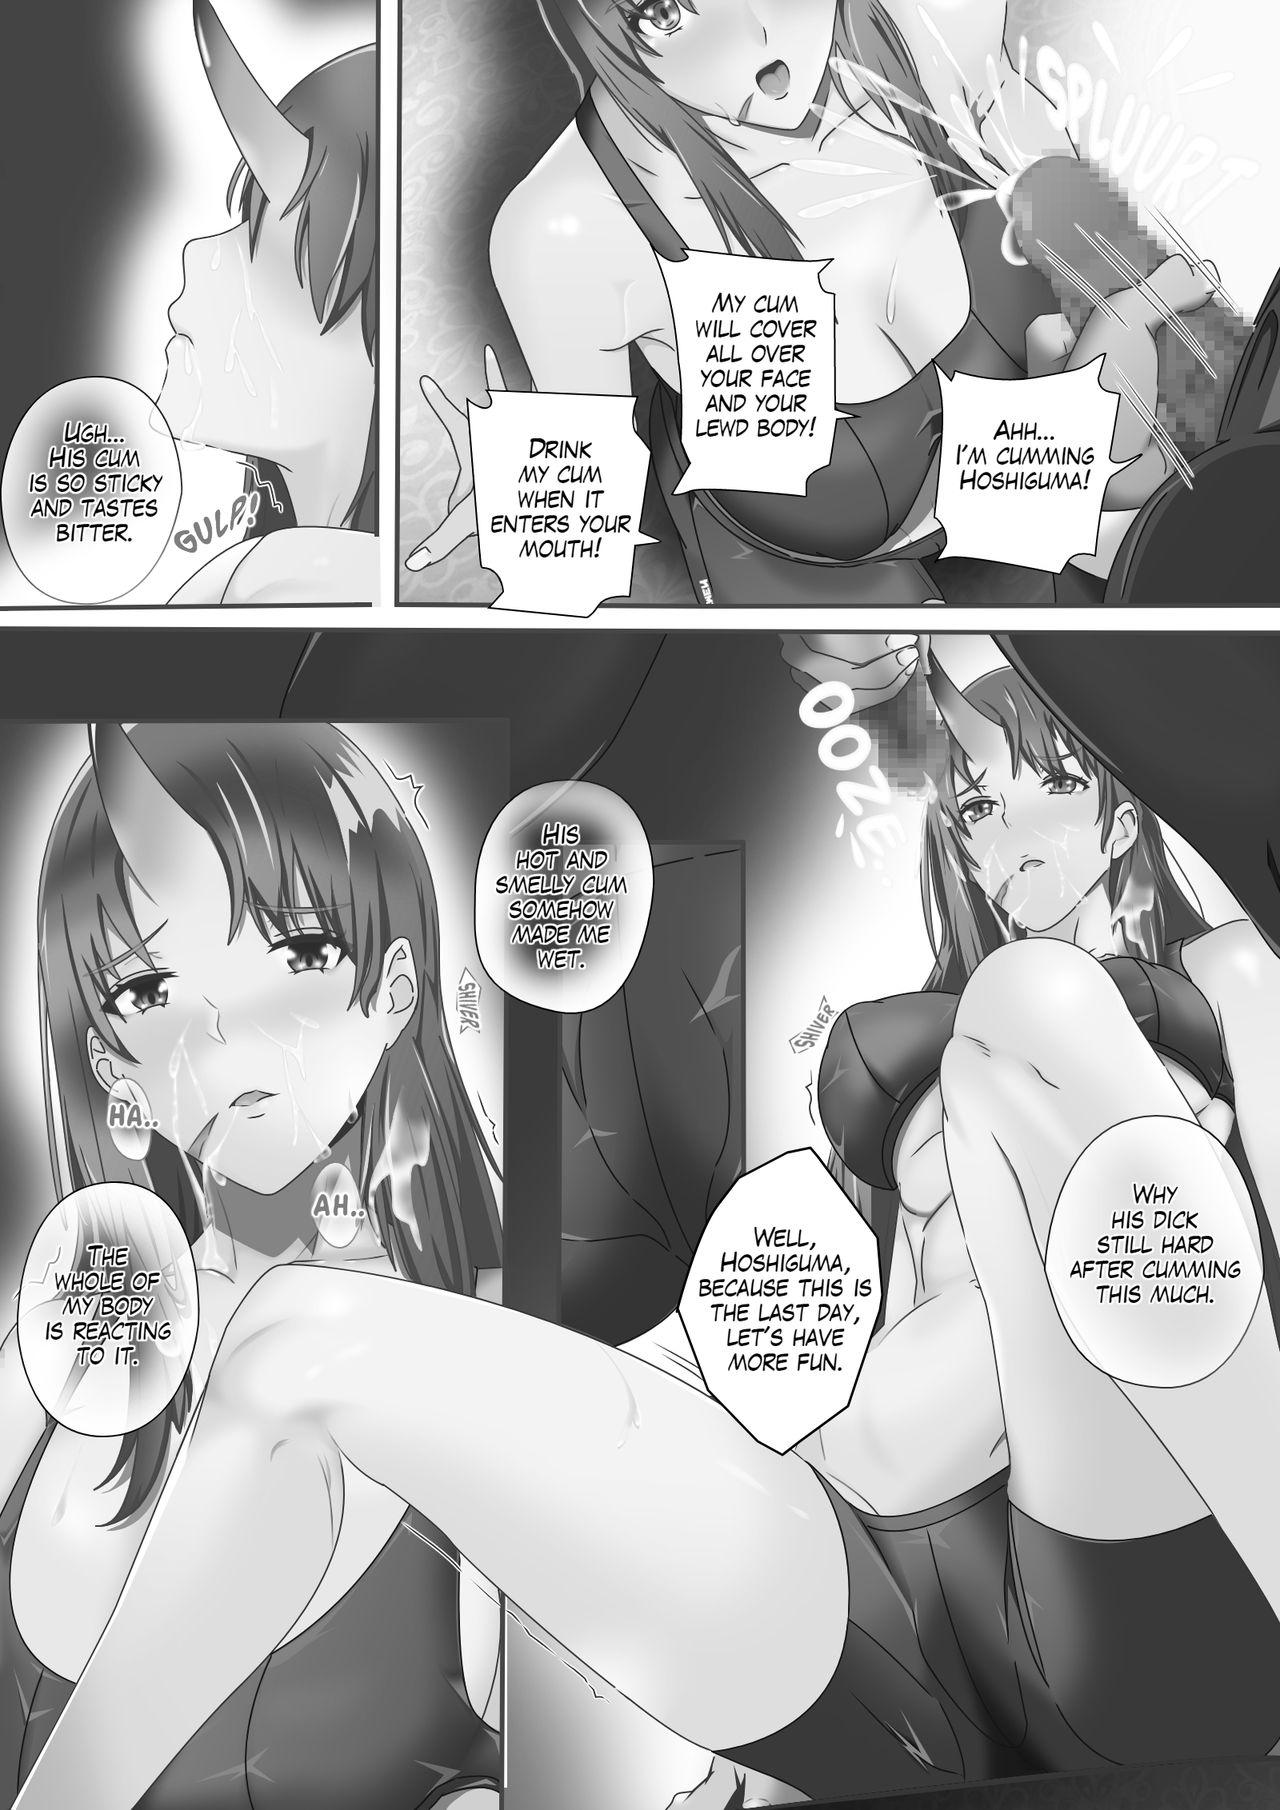 Topless Hoshiguma's Secret Contract - Arknights Abuse - Page 6